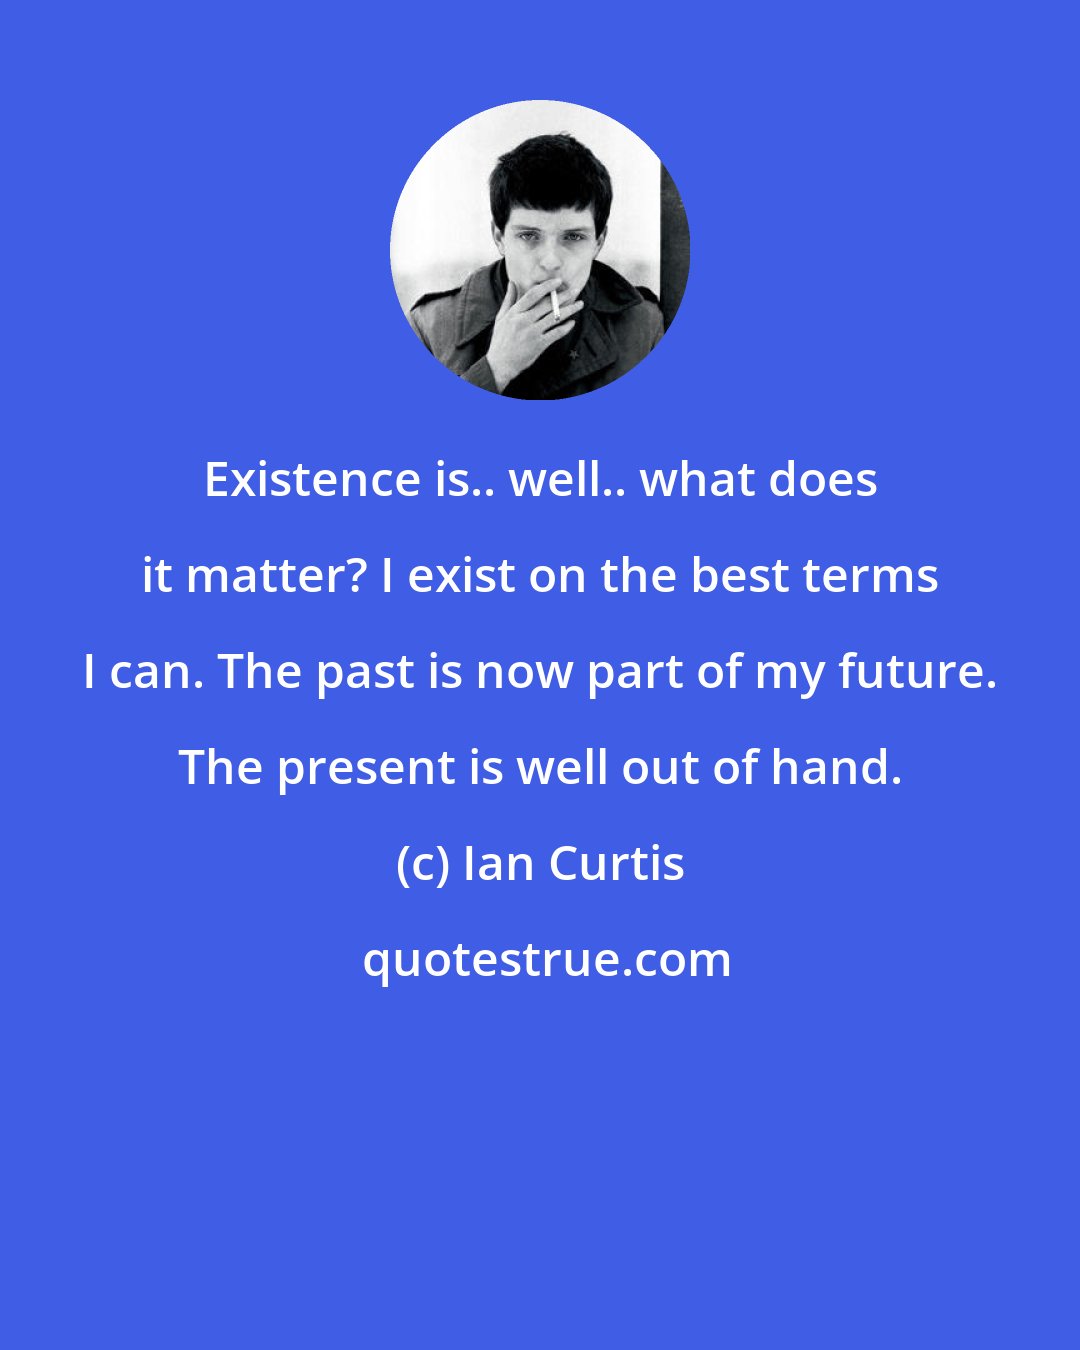 Ian Curtis: Existence is.. well.. what does it matter? I exist on the best terms I can. The past is now part of my future. The present is well out of hand.